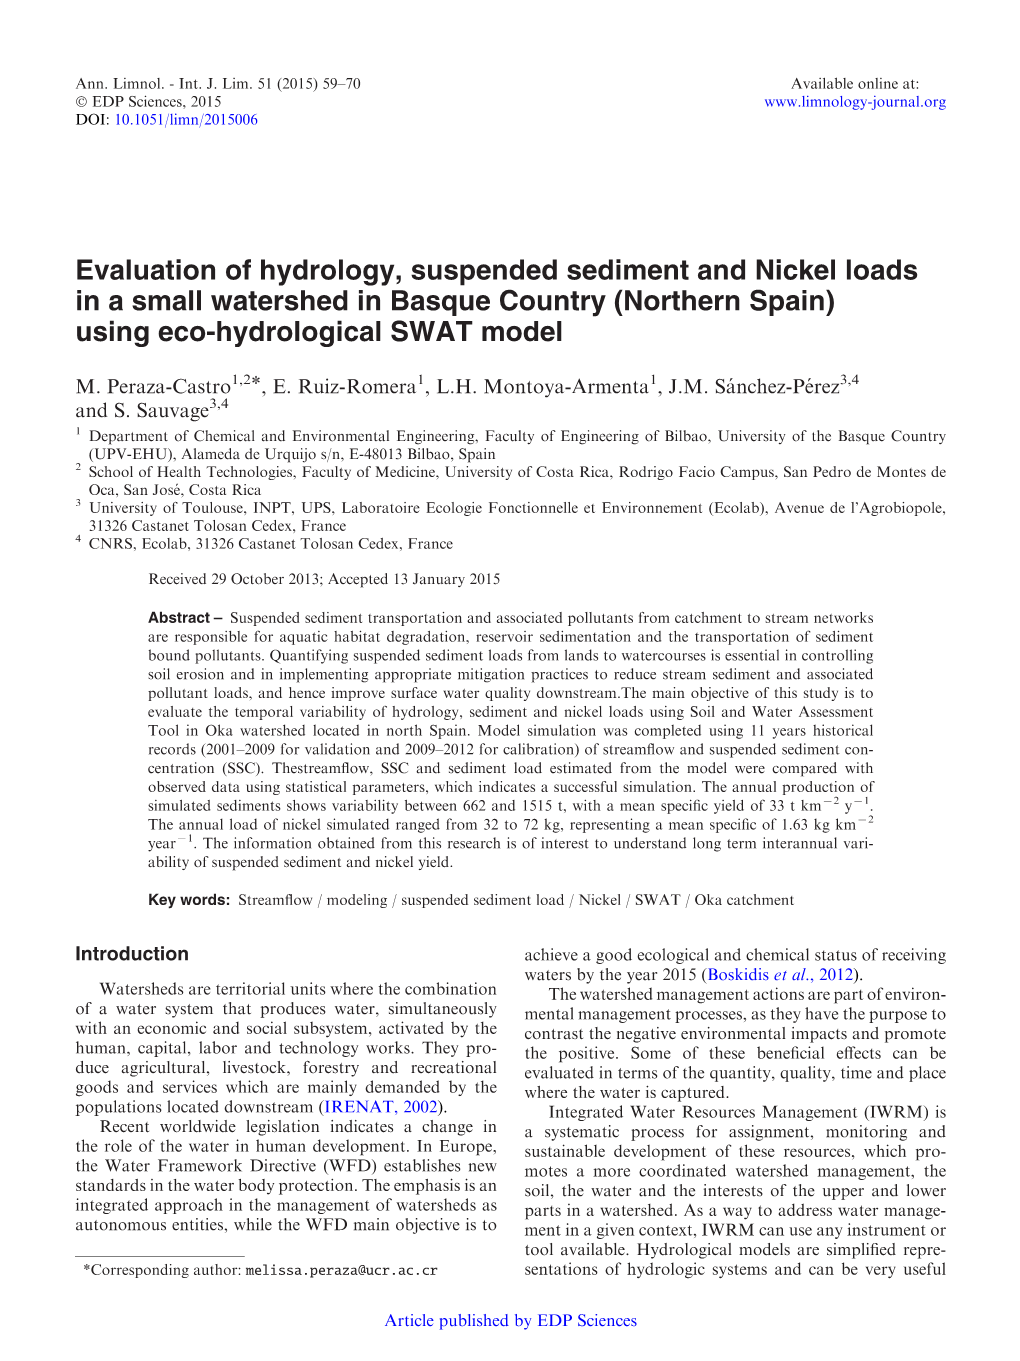 Evaluation of Hydrology, Suspended Sediment and Nickel Loads in a Small Watershed in Basque Country (Northern Spain) Using Eco-Hydrological SWAT Model